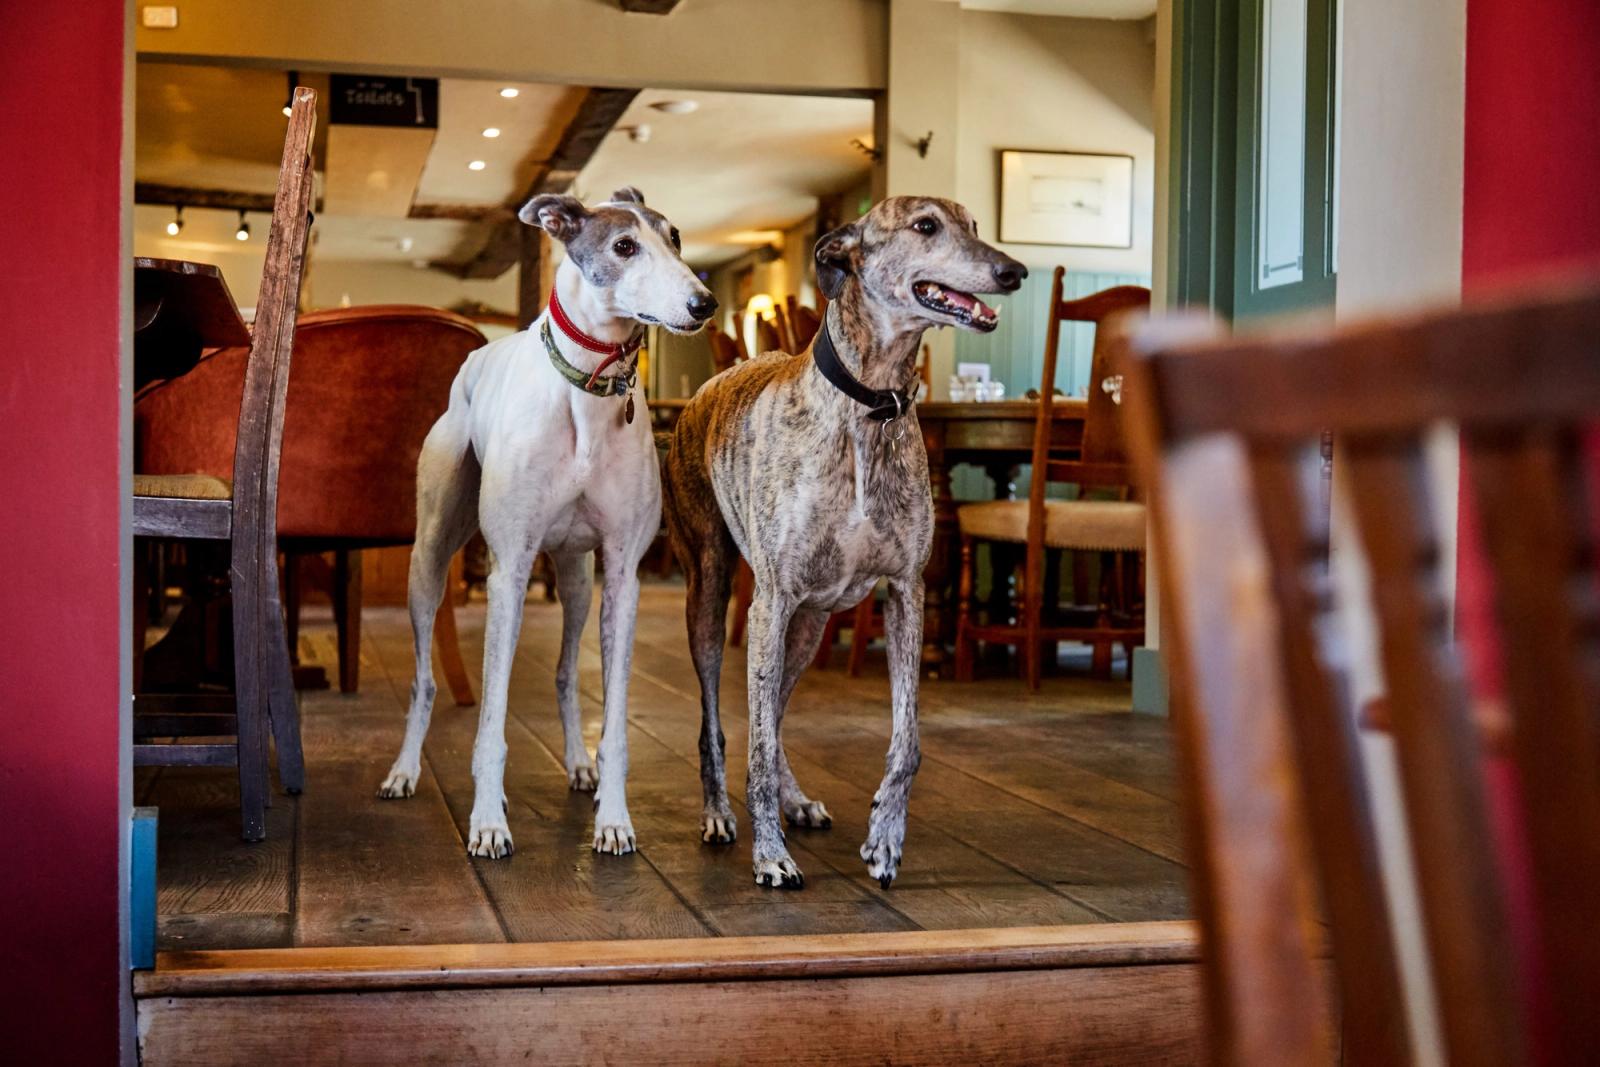 Dog friendly pubs with rooms